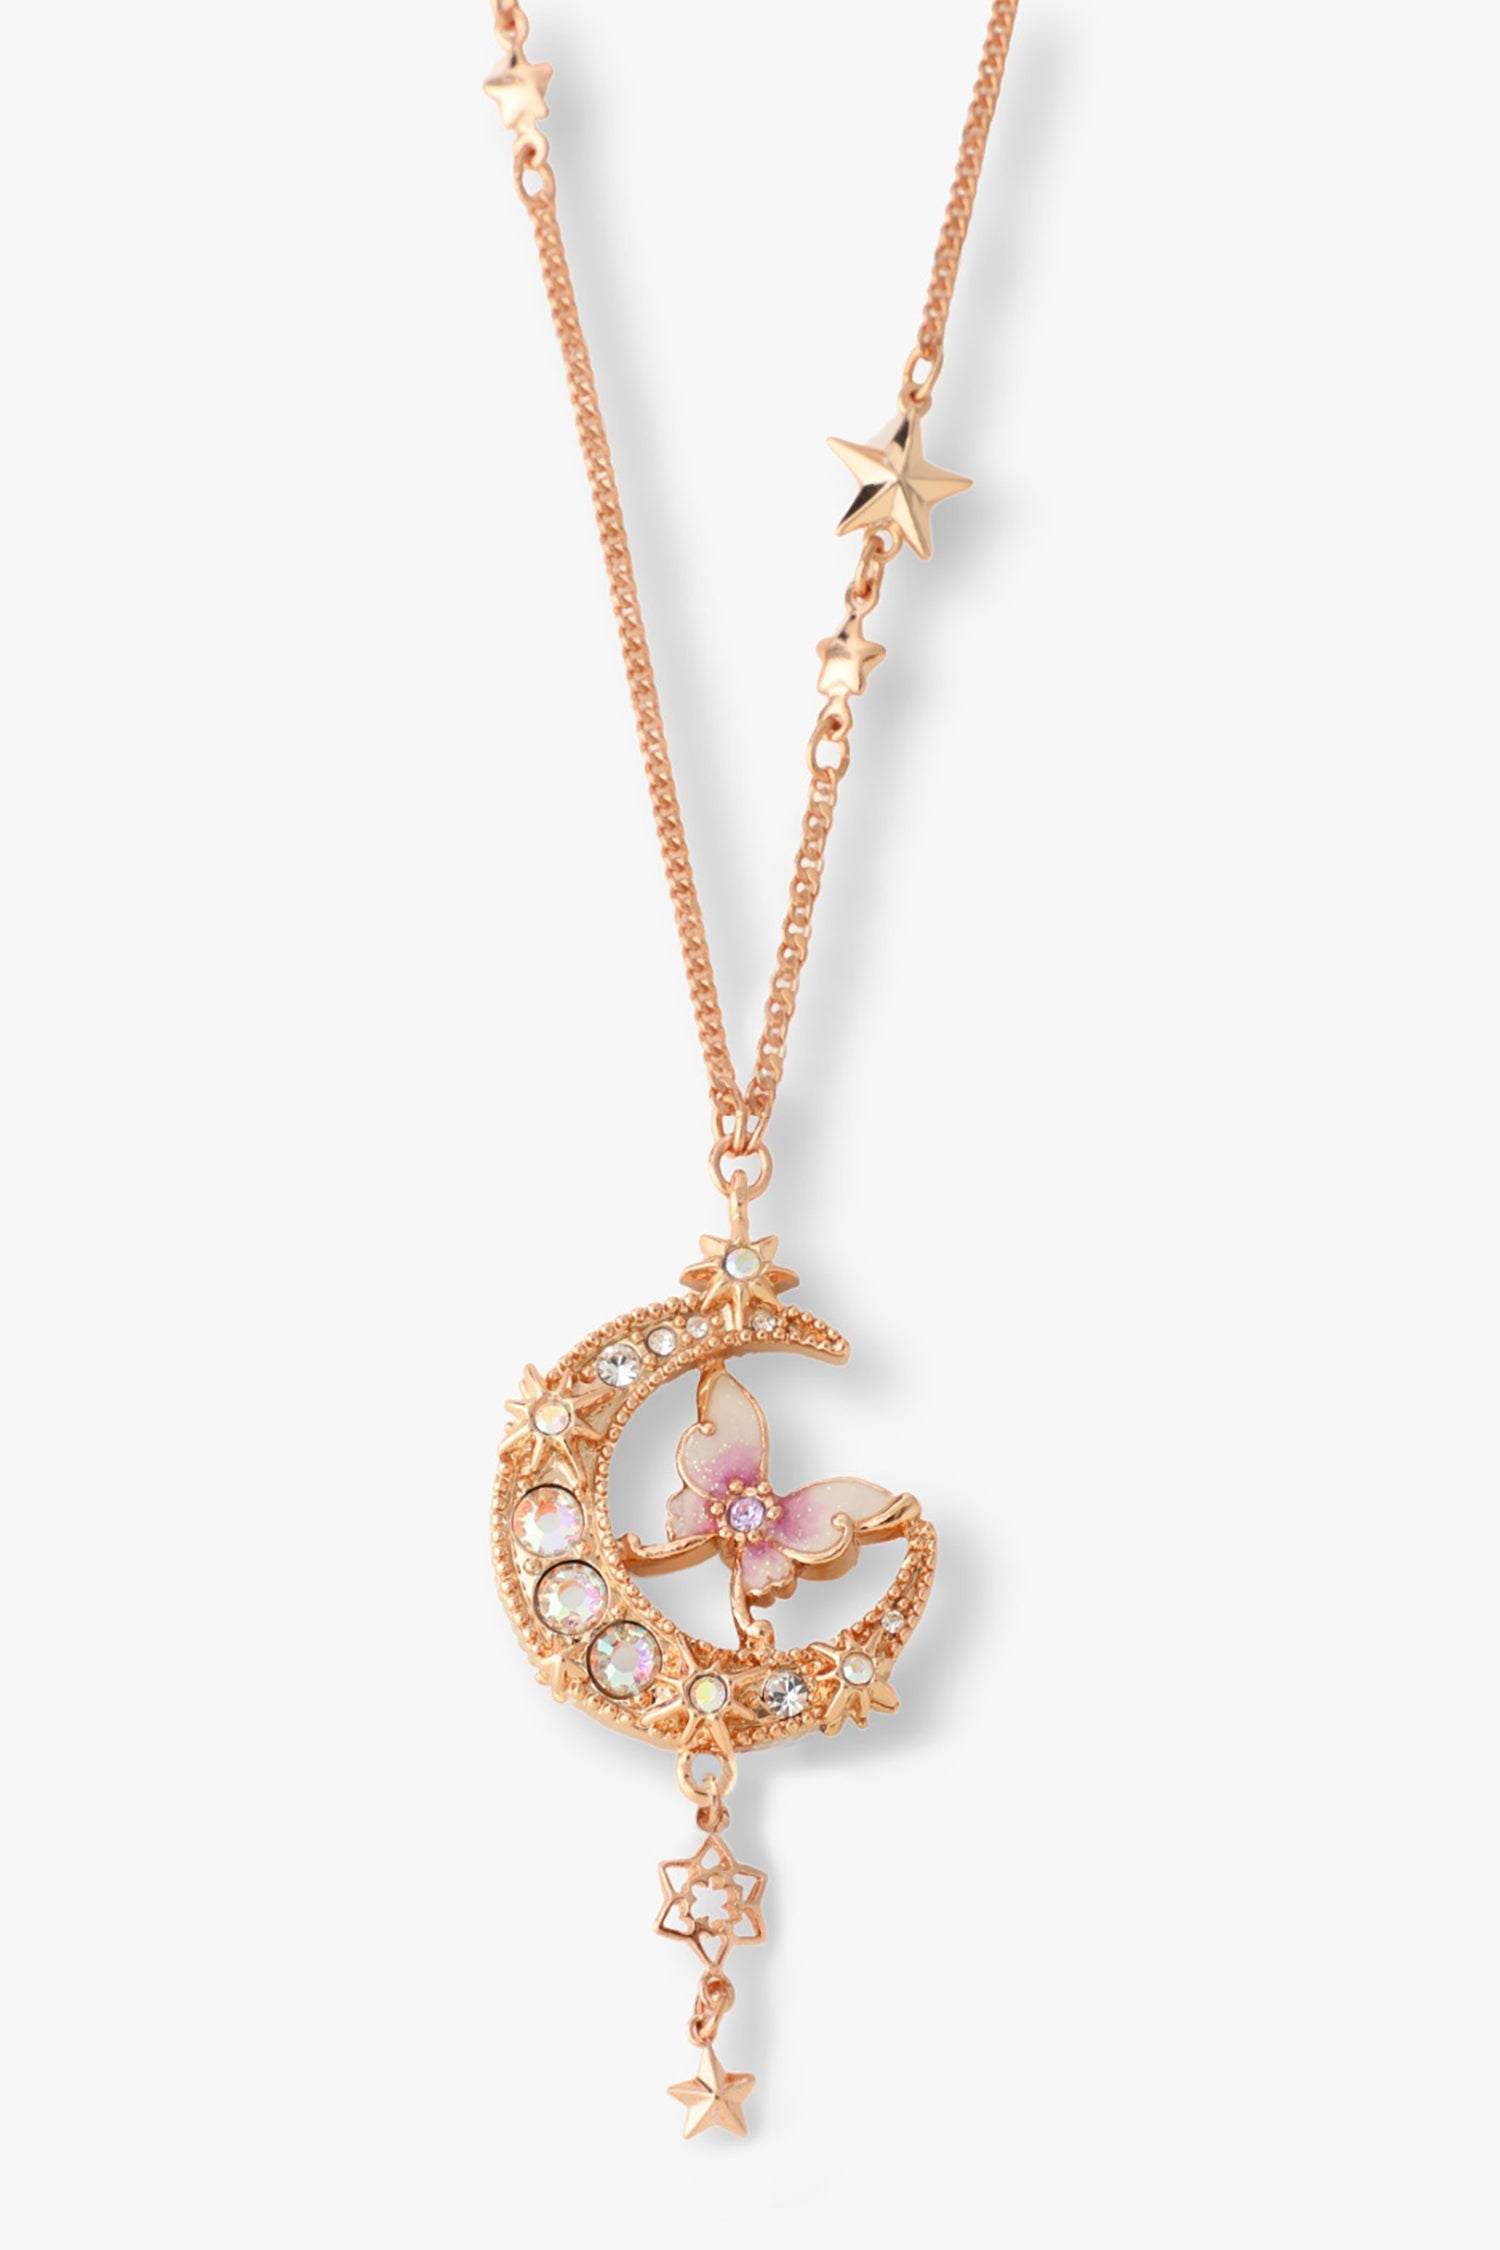 Moon and Butterfly pendant side gems, Star Charms/Whimsically with Gems, rose gold chain 